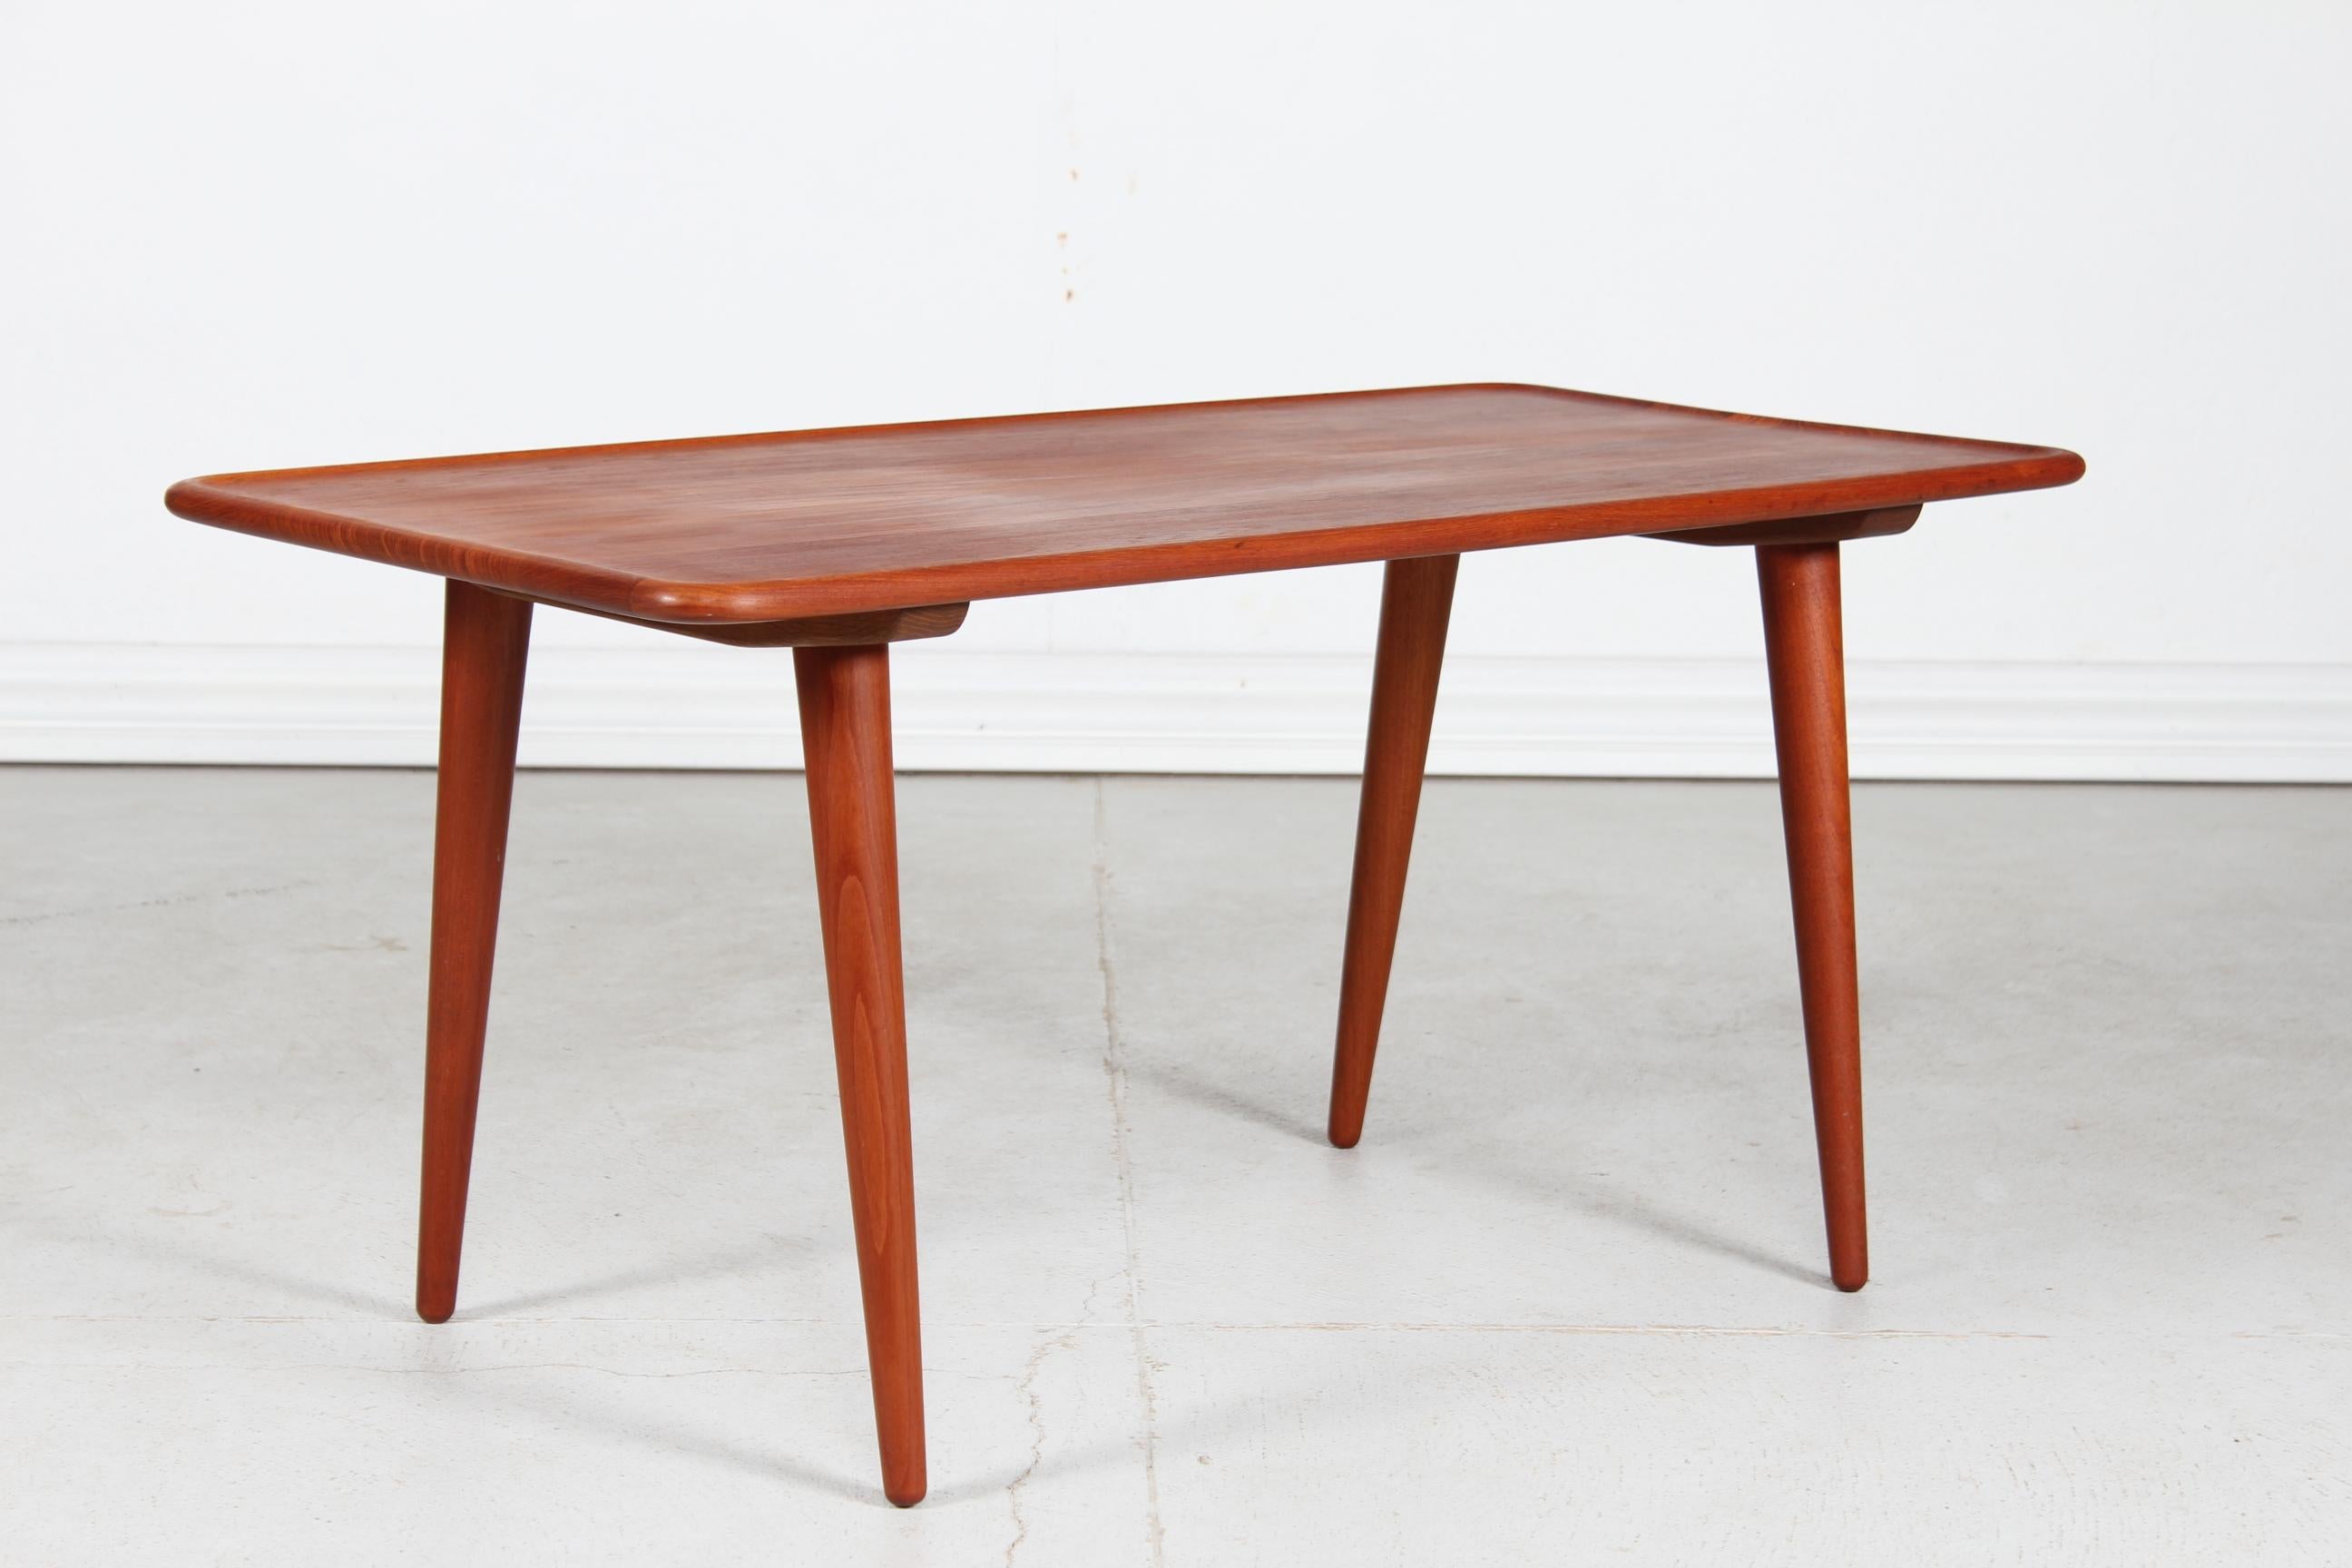 Vintage coffee table model AT 11 by Danish architect Hans J. Wegner (1914-2007) manufactured by Andreas Tuck in the 1950s.

Oblong coffee table made of solid teak with oil treatment. The tabletop has a raised edge and the slightly conical legs are